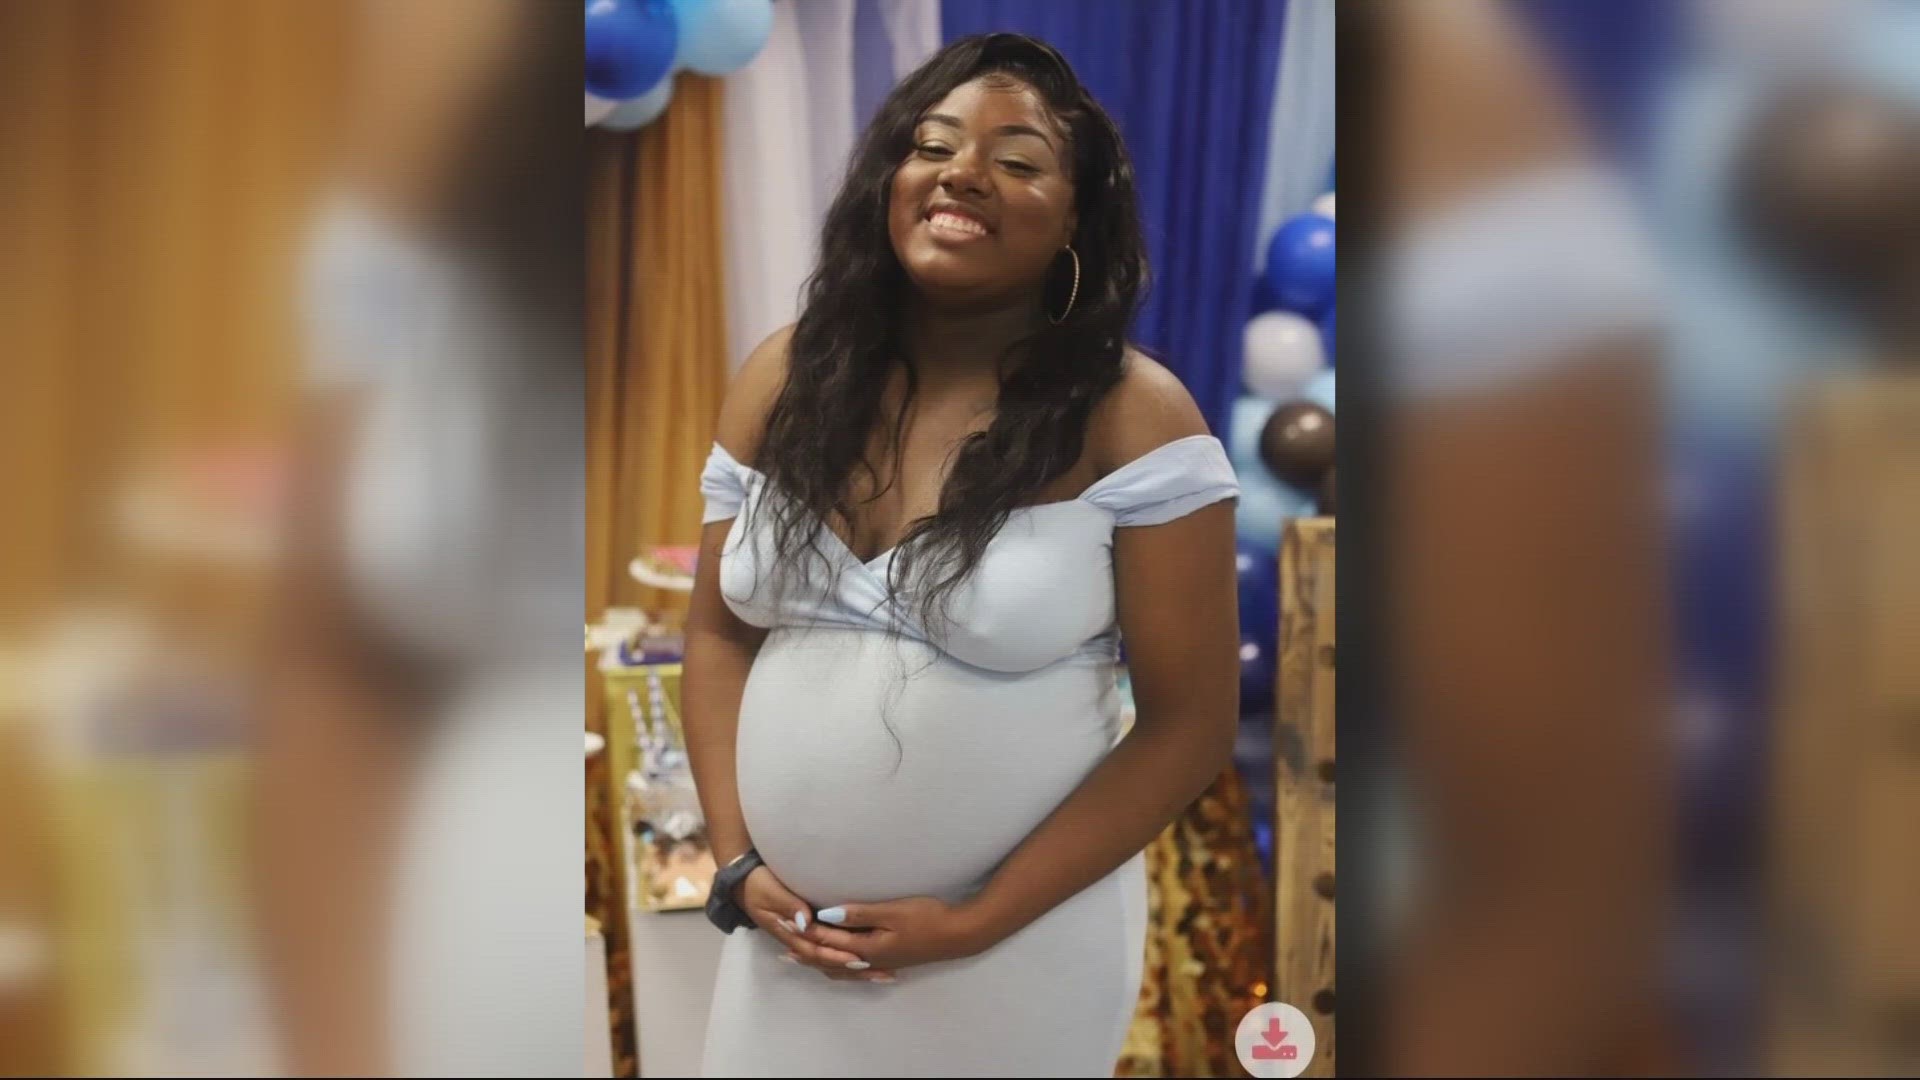 Felicia Jones was two weeks away from giving birth when she was killed, family told First Coast News.